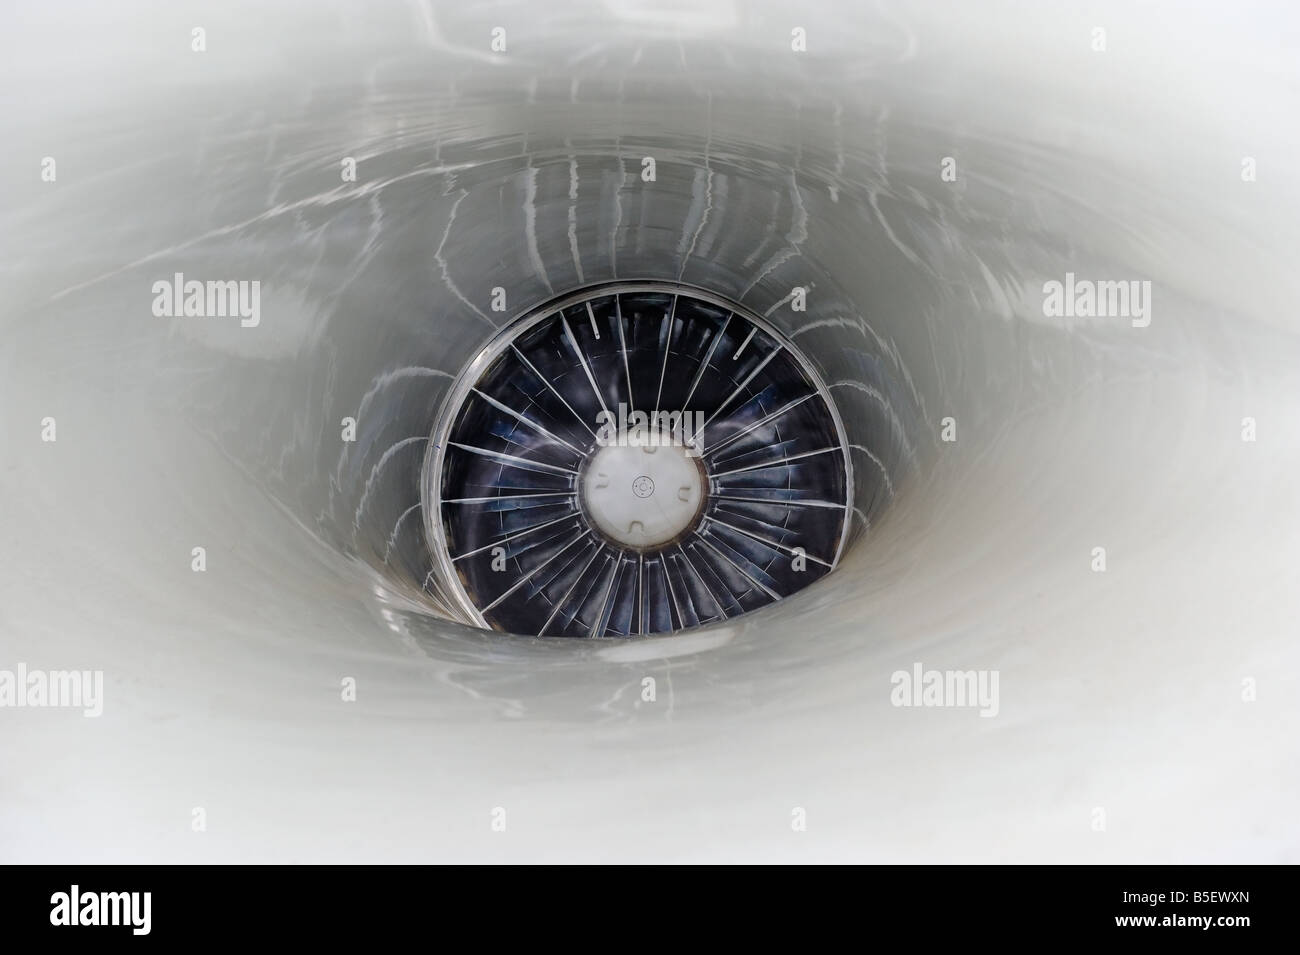 Close up of a F16 jet engine seen from the front end Stock Photo